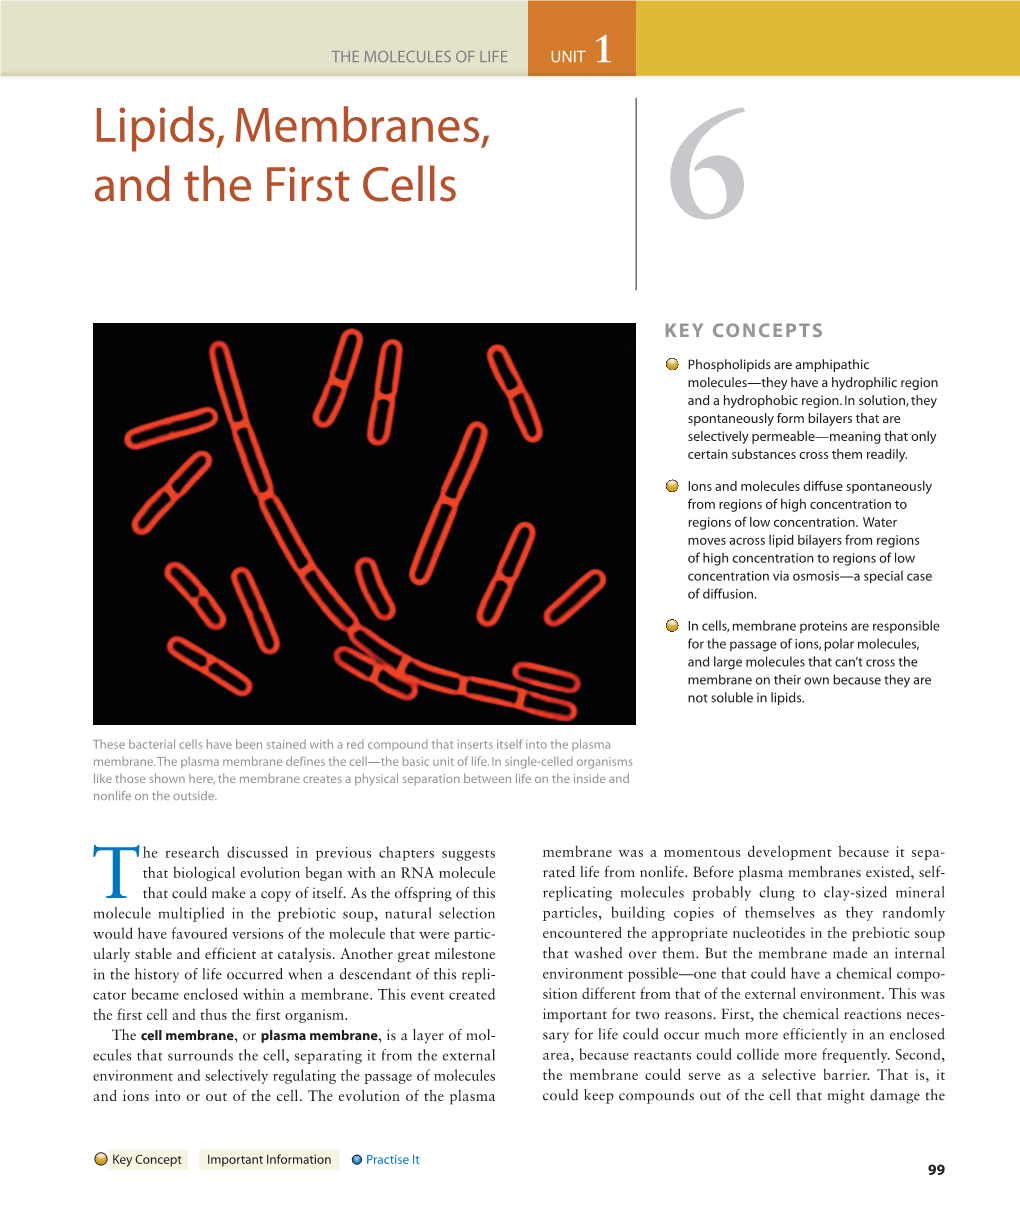 Lipids, Membranes, and the First Cells 6